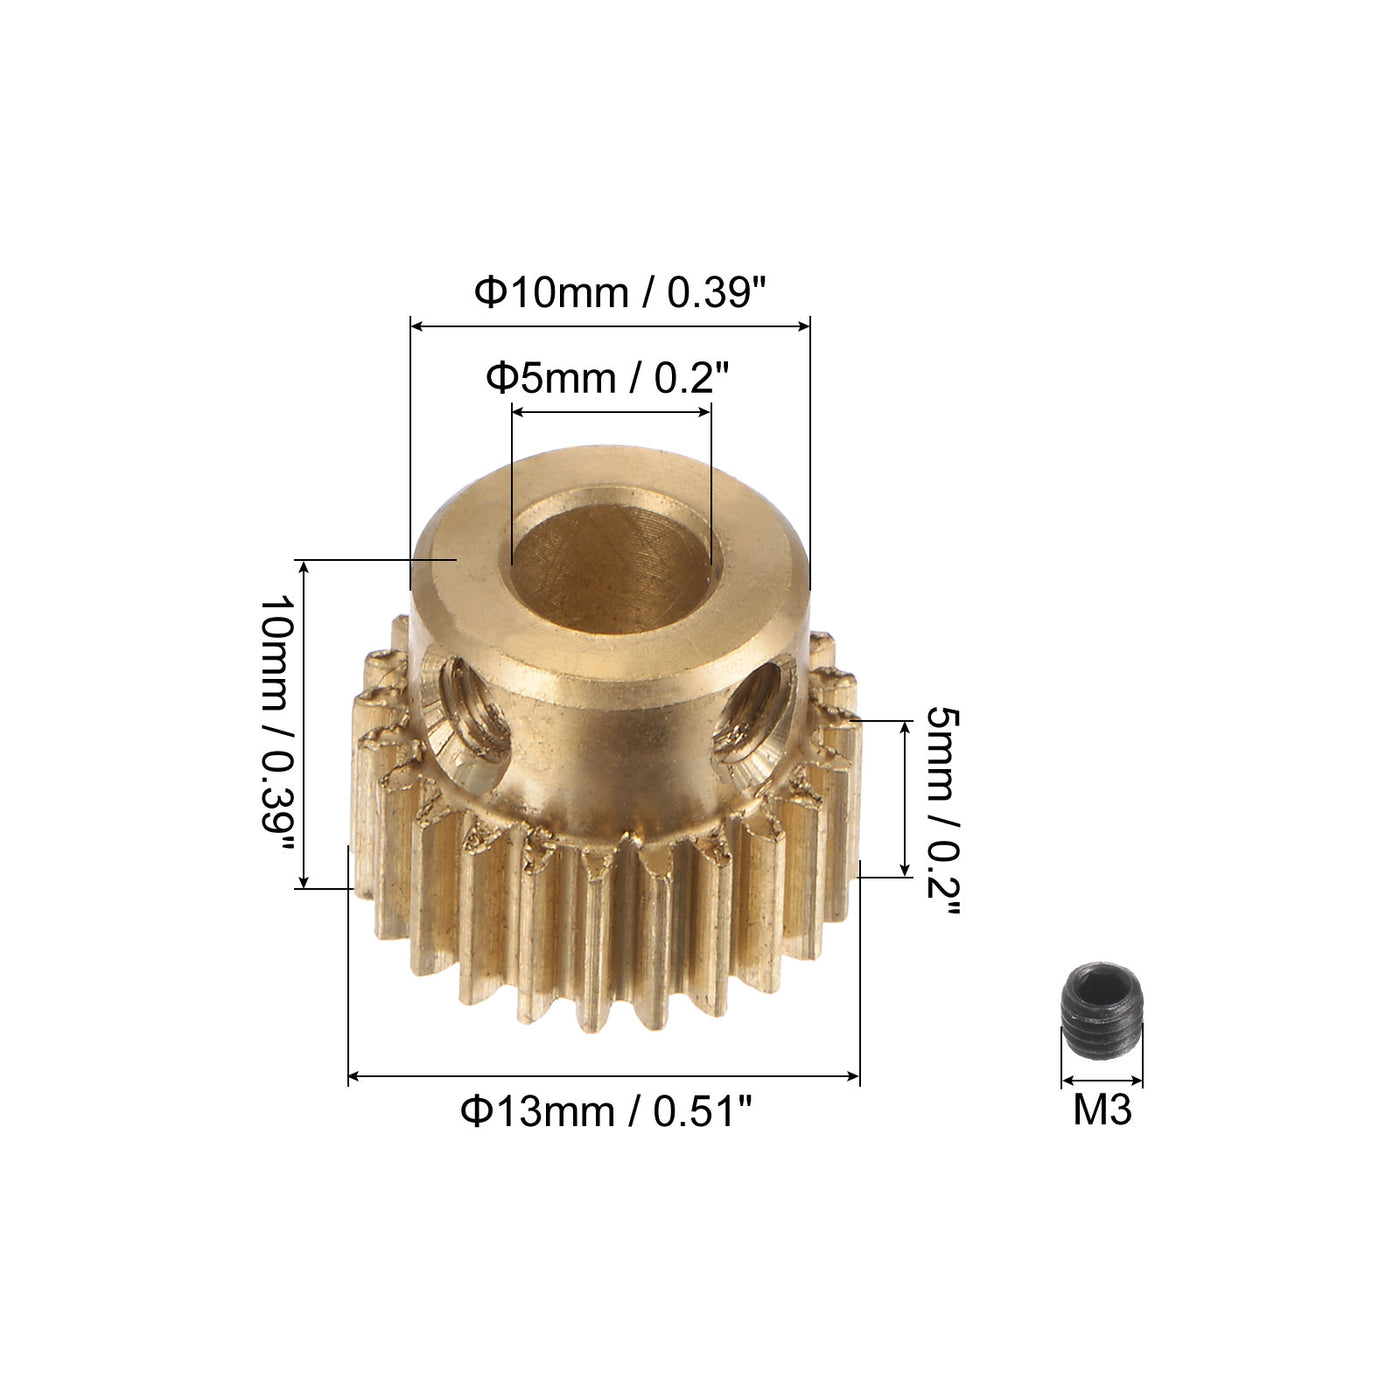 uxcell Uxcell 0.5 Mod 24T 5mm Bore 13mm Outer Dia Brass Motor Rack Pinion Gear with Screws